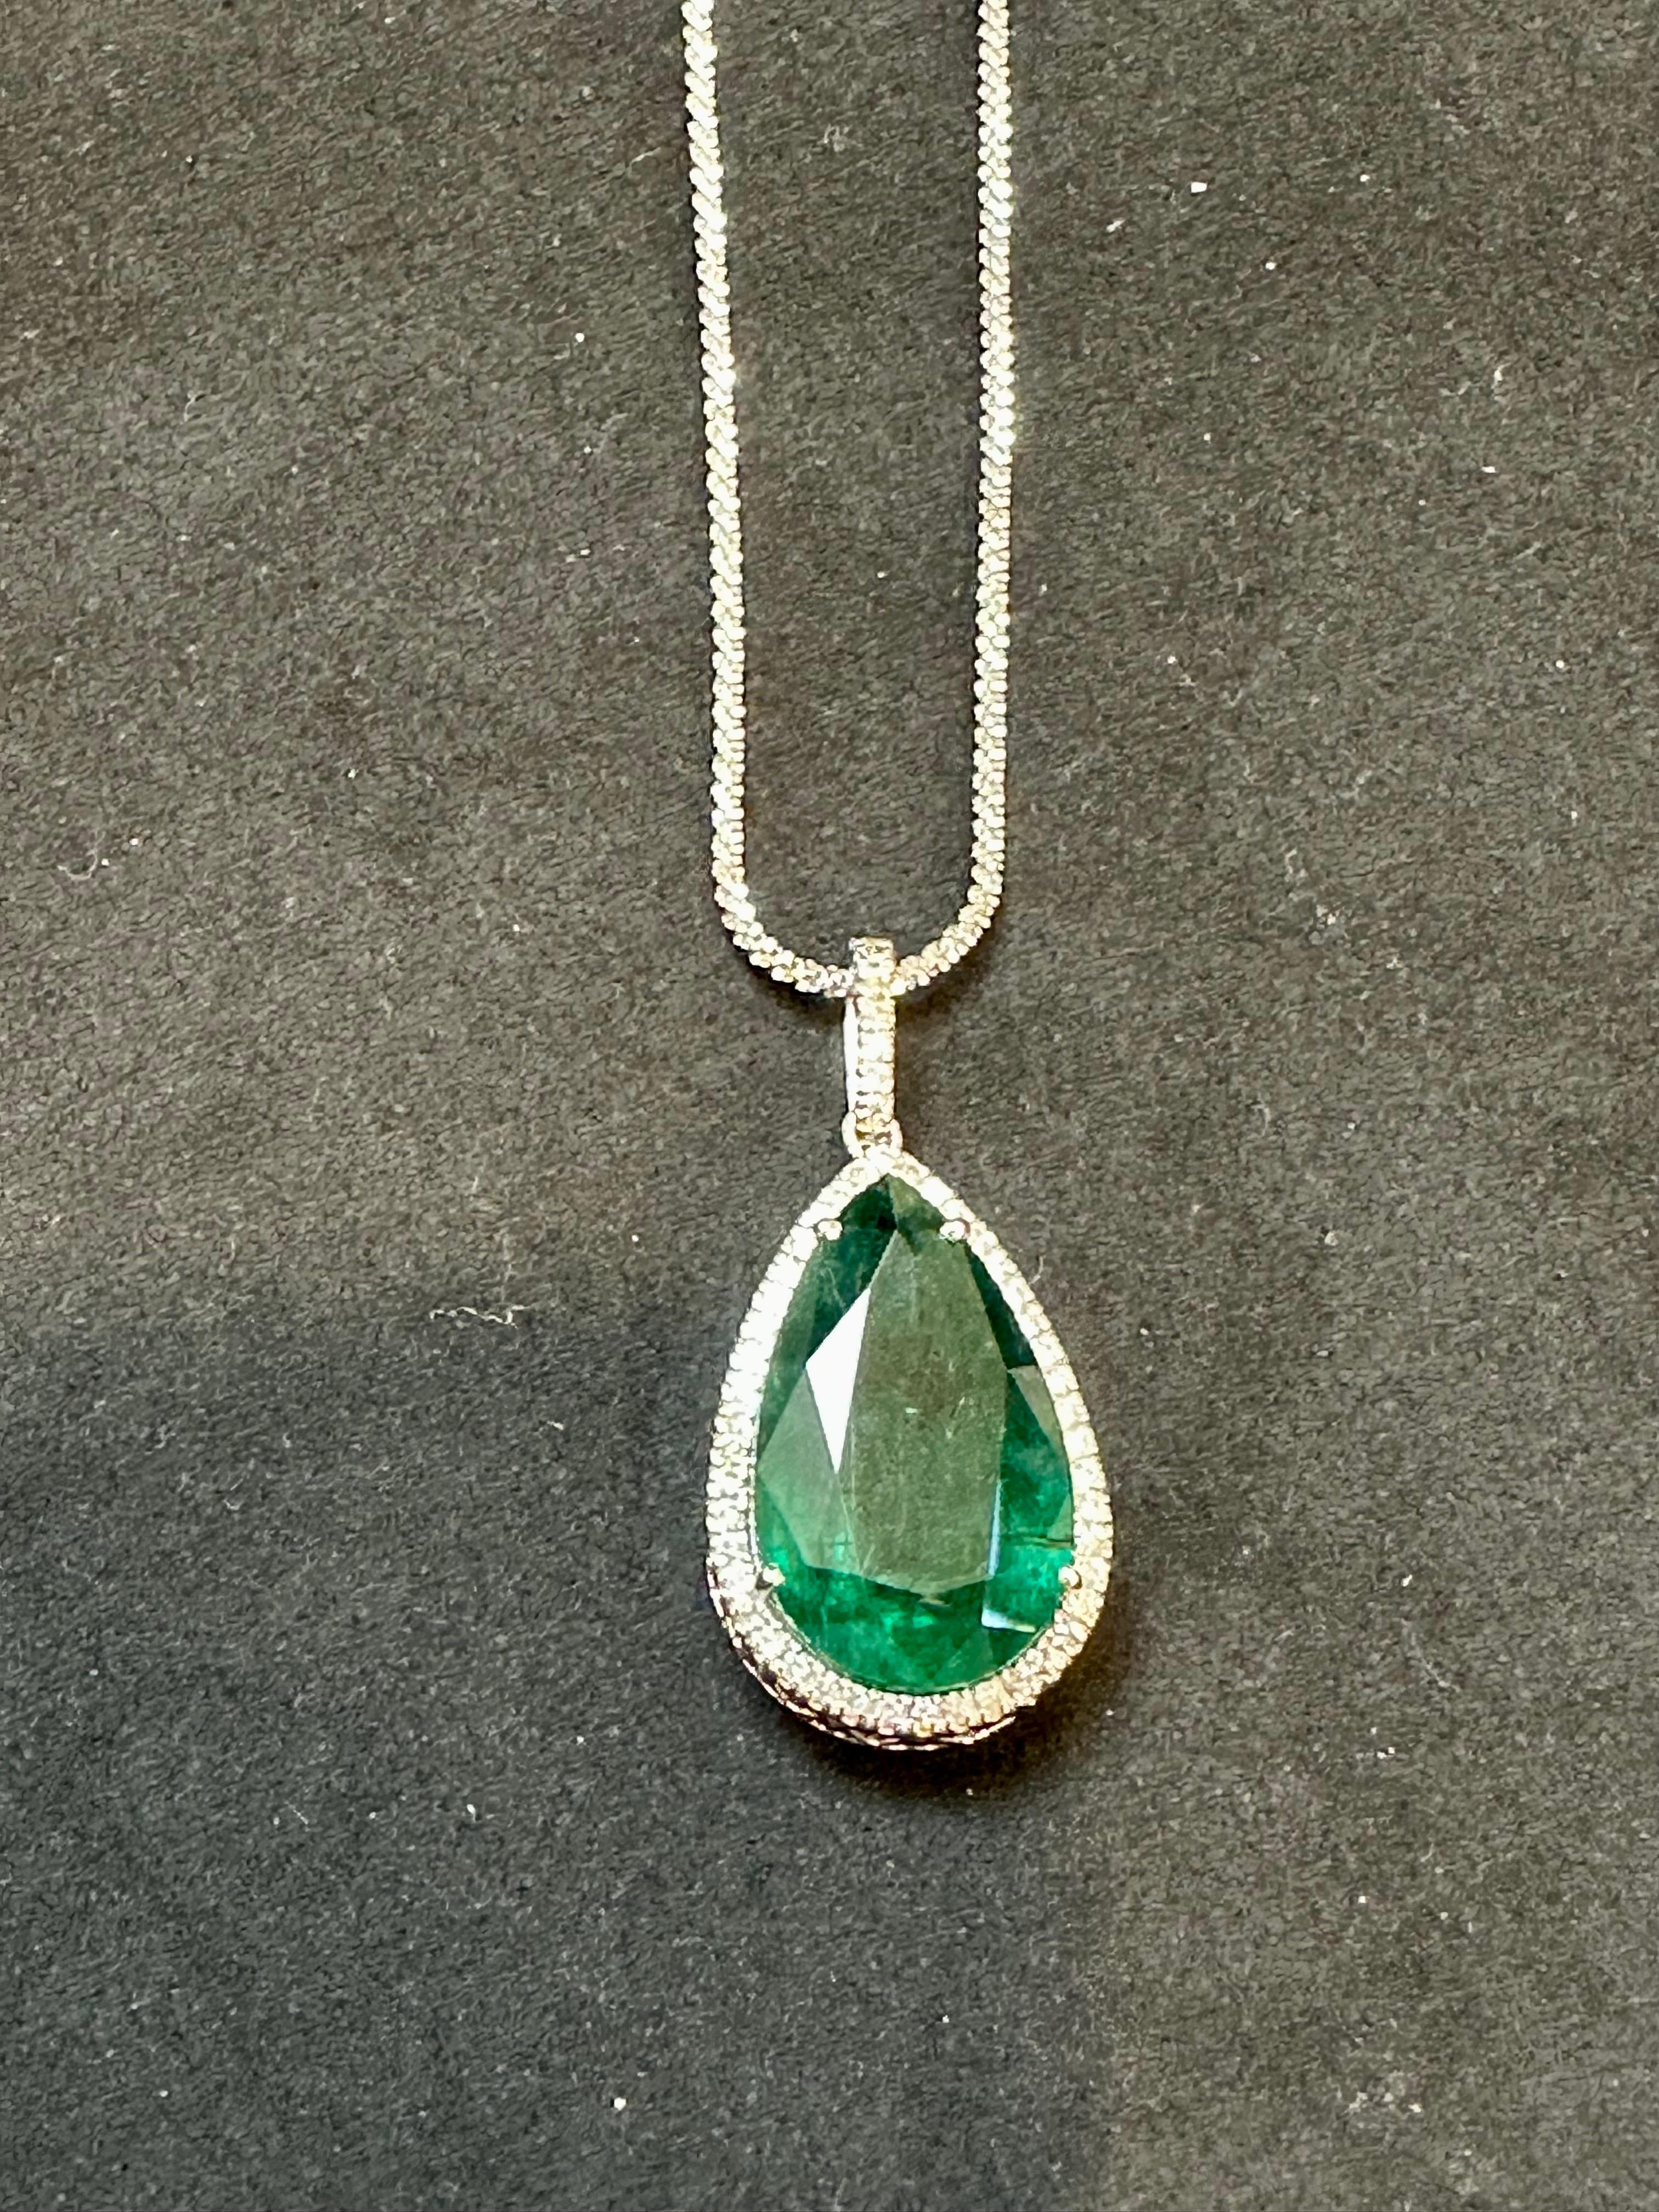 19 Ct Pear Cut Emerald & 1 Ct Diamond Halo Pendent/Necklace 14 KW Gold Chain For Sale 3